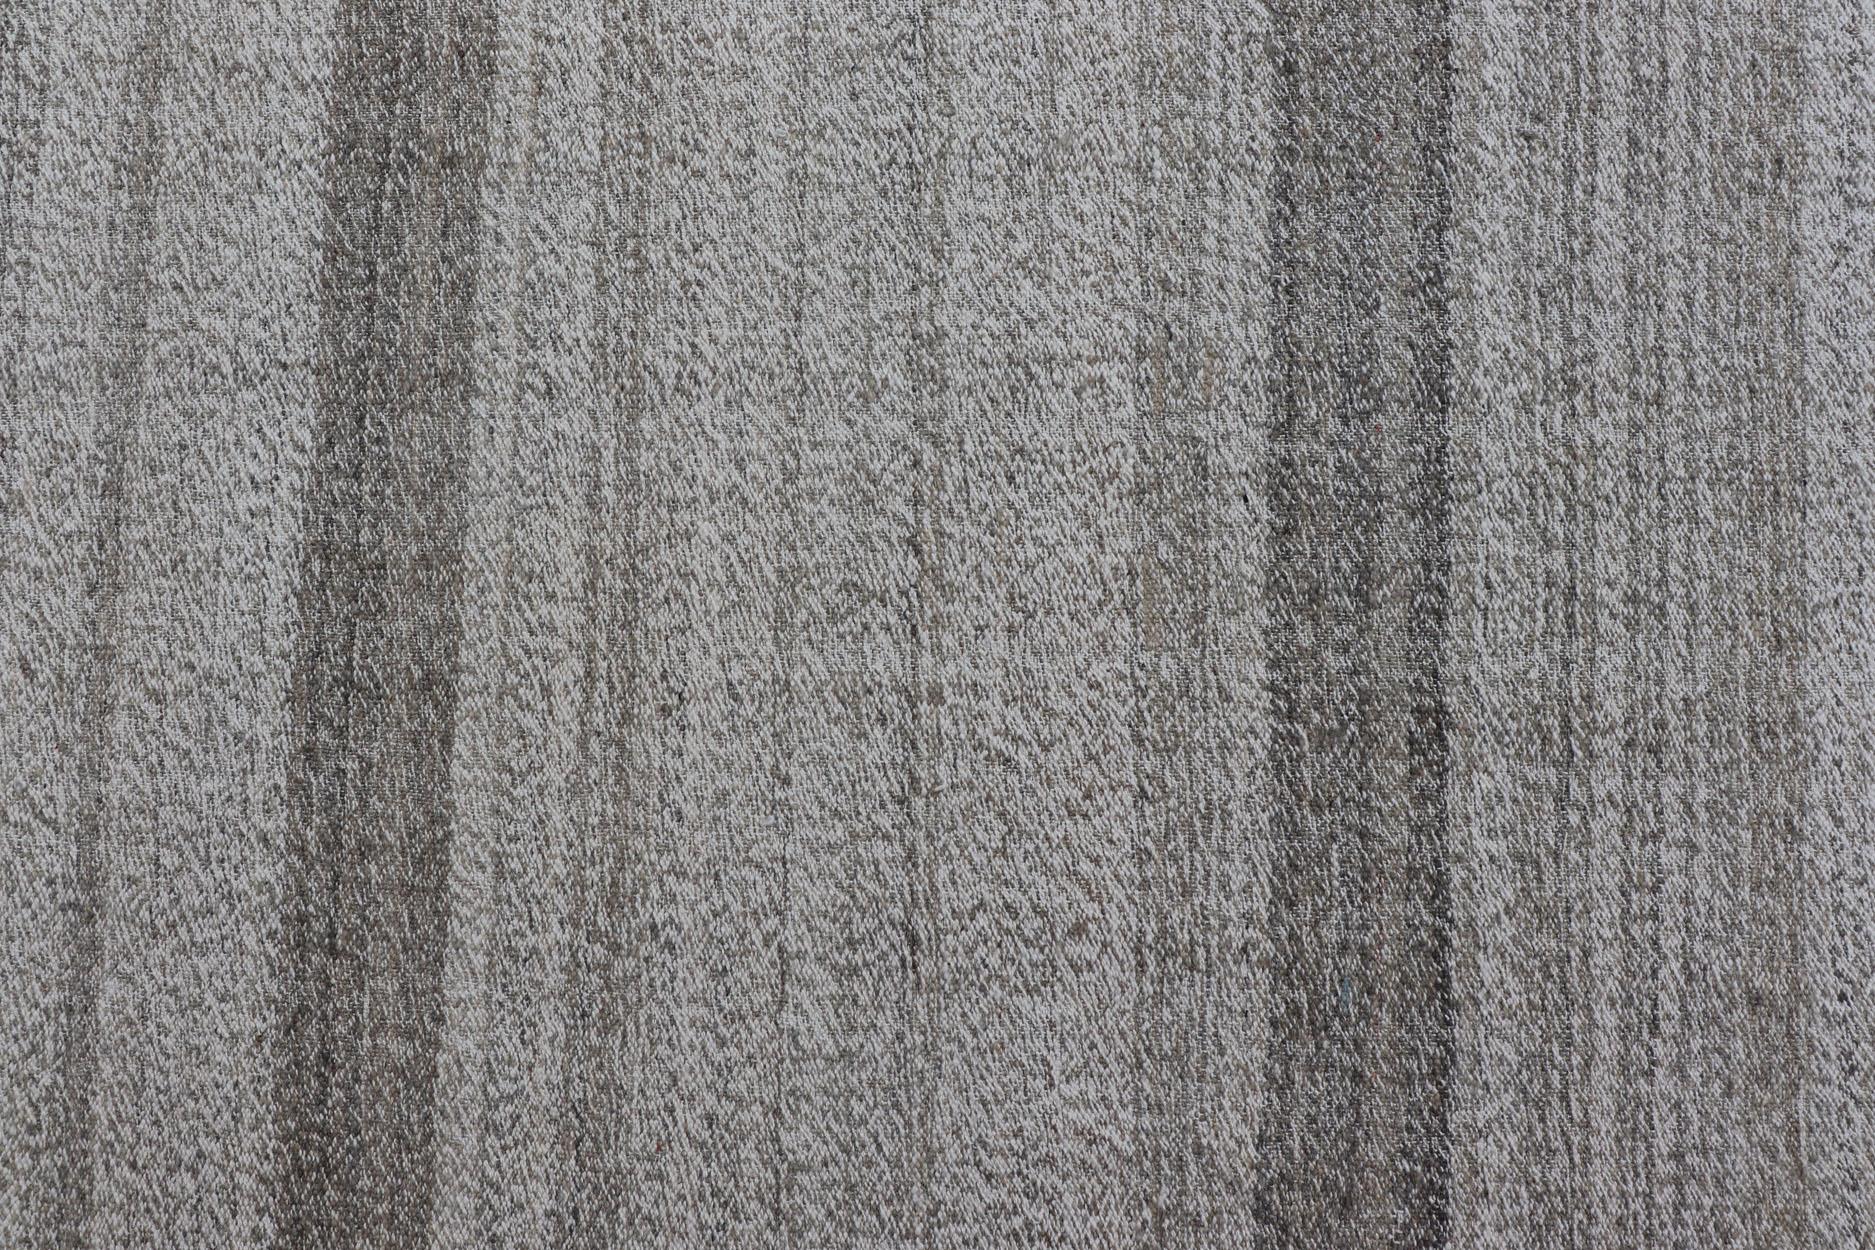  Modern Kilim Rug with Stripes in Neutral tones Shades of Gray  For Sale 6